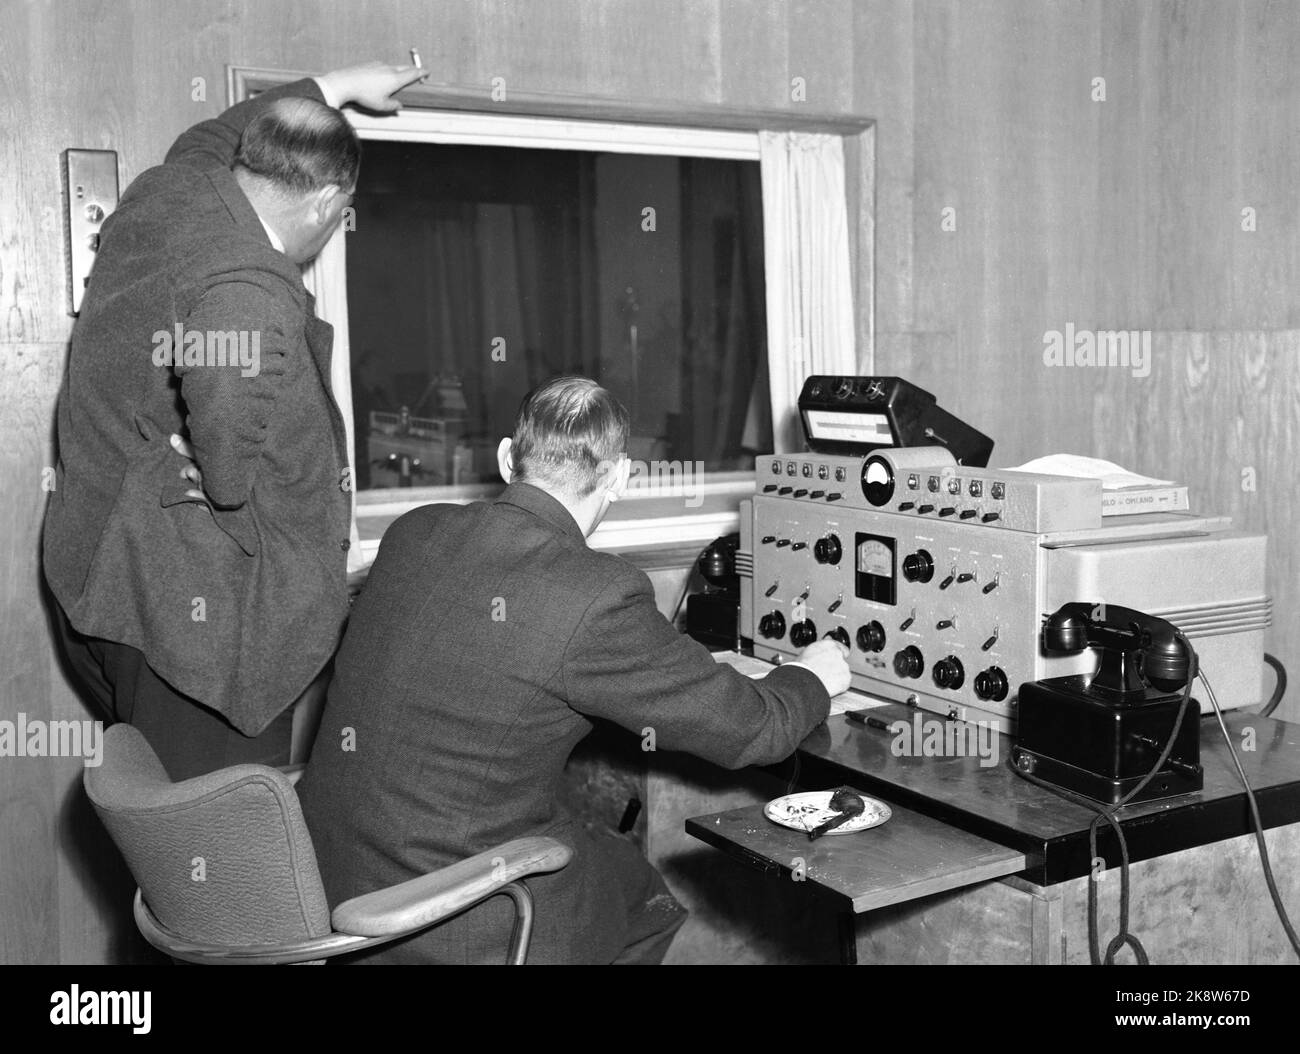 Oslo 19461026: Norwegian National Broadcasting (NRK) - Technical equipment from the post -war NRK. At that time it was only radio. Here technical equipment in the control room. An old telephone device on the table. - This was before the smoking law - one man smokes a cigarette, the other has a pipe lying ready. Photo: H.A.A. Stock Photo